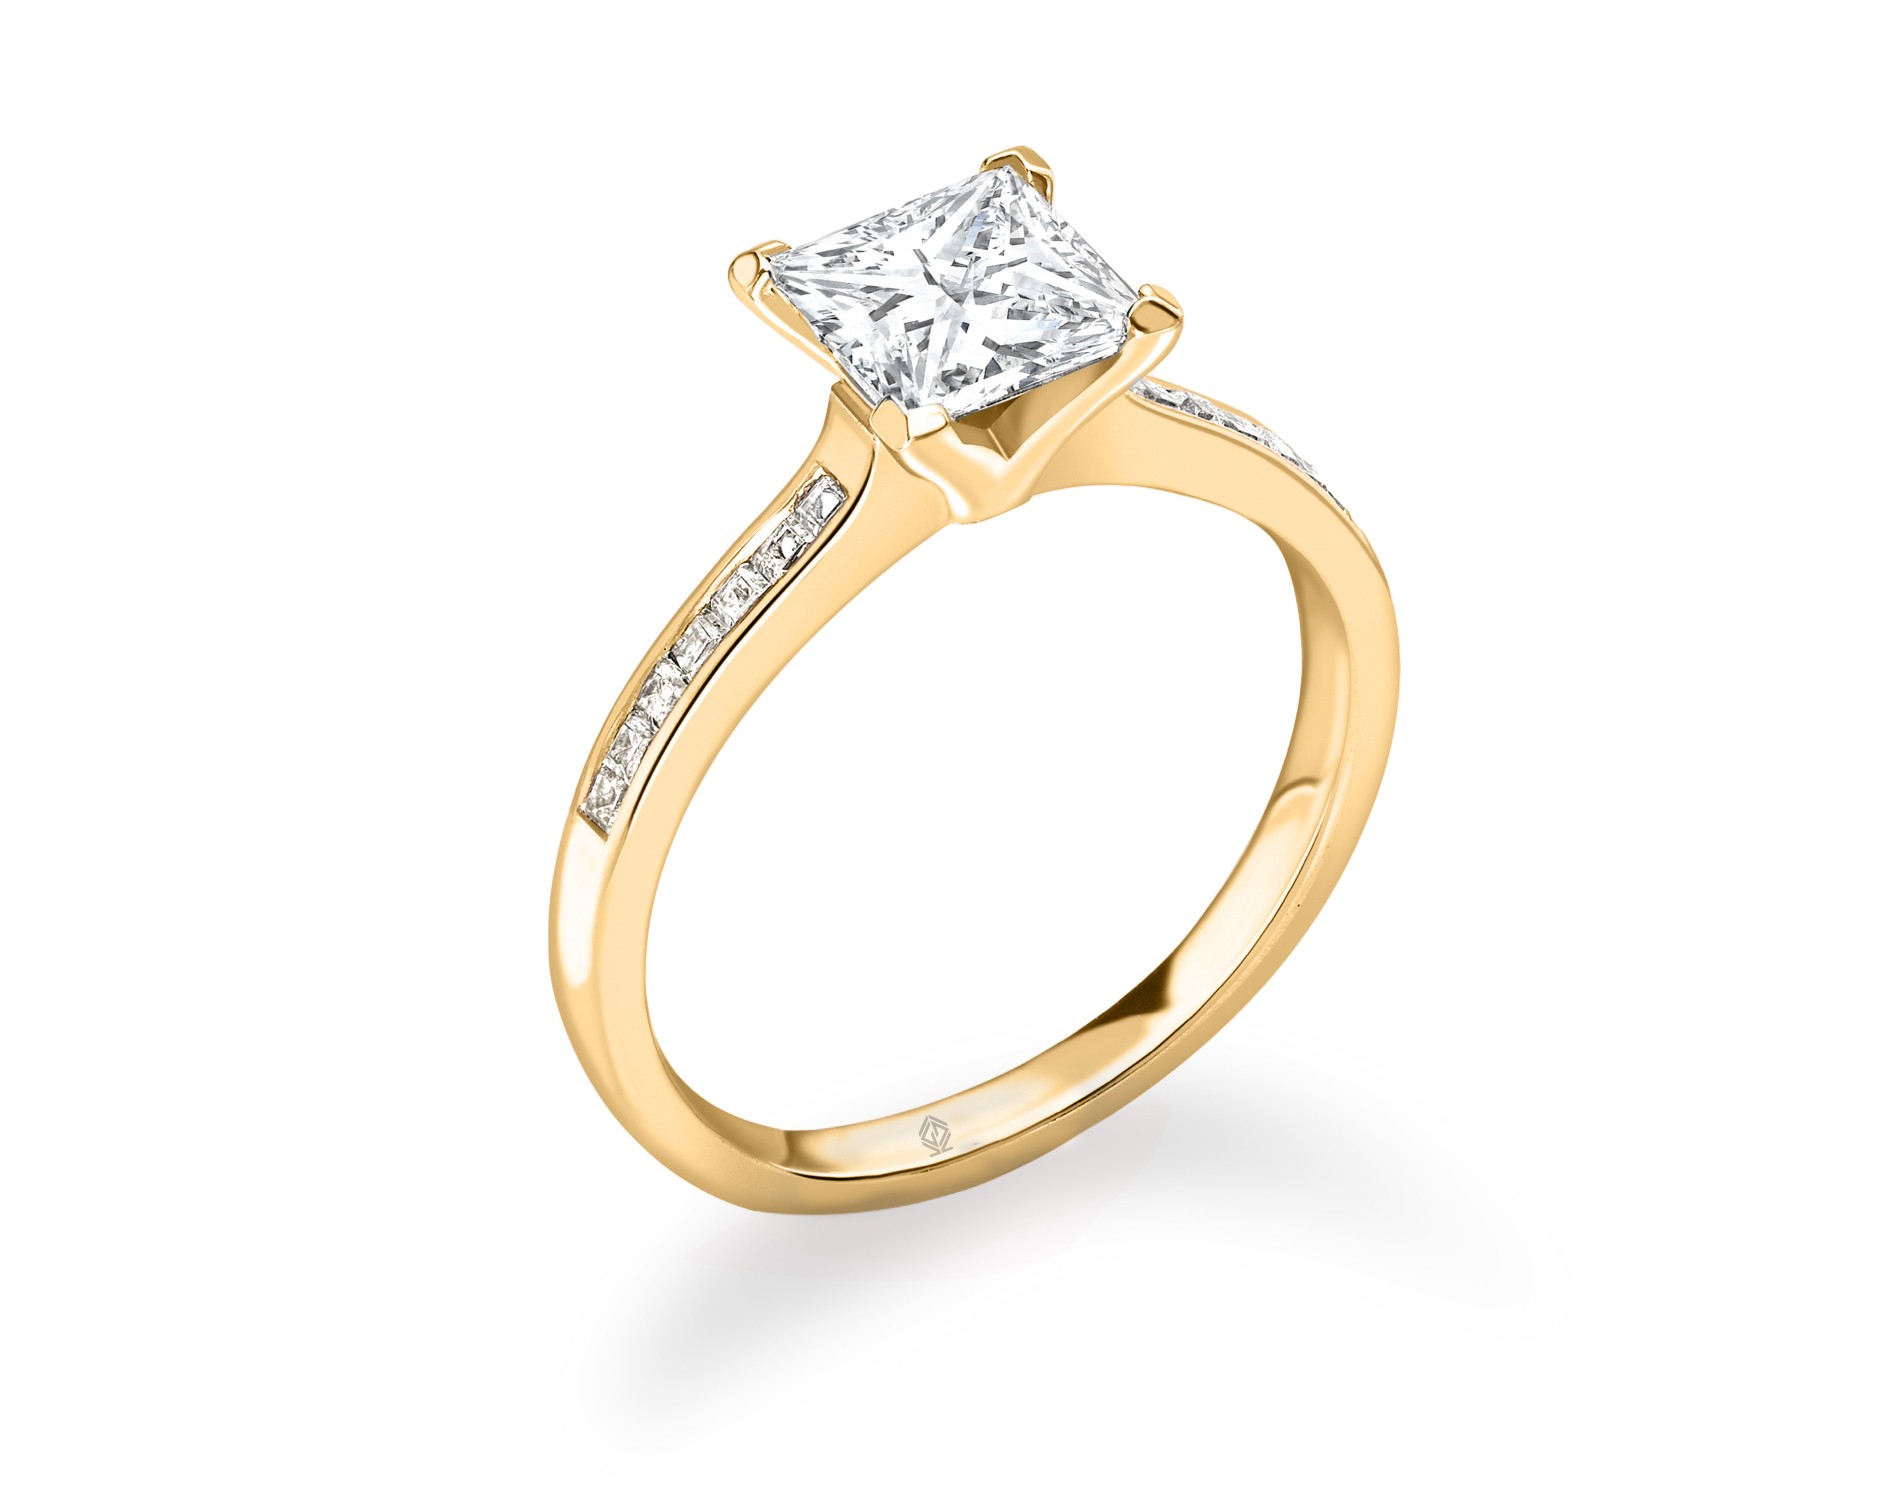 18K YELLOW GOLD 4 PRONGS PRINCESS CUT DIAMOND ENGAGEMENT RING WITH SIDE STONES CHANNEL SET